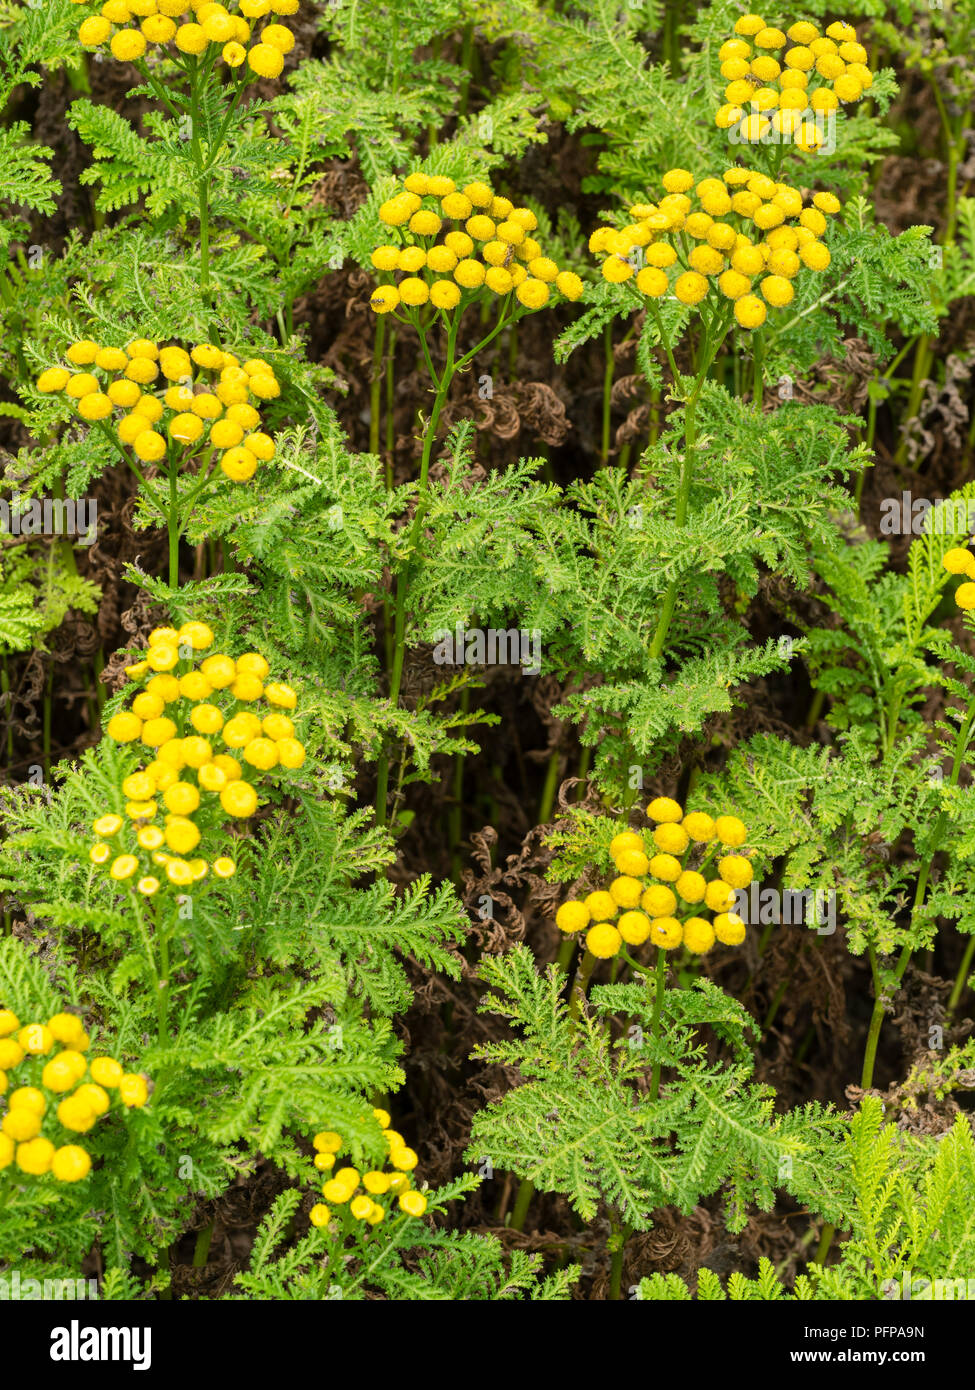 Yellow button flowers and ferny foliage of tansy, Tanacetum vulgare, a medicinal herb which is toxic in larger quantities Stock Photo